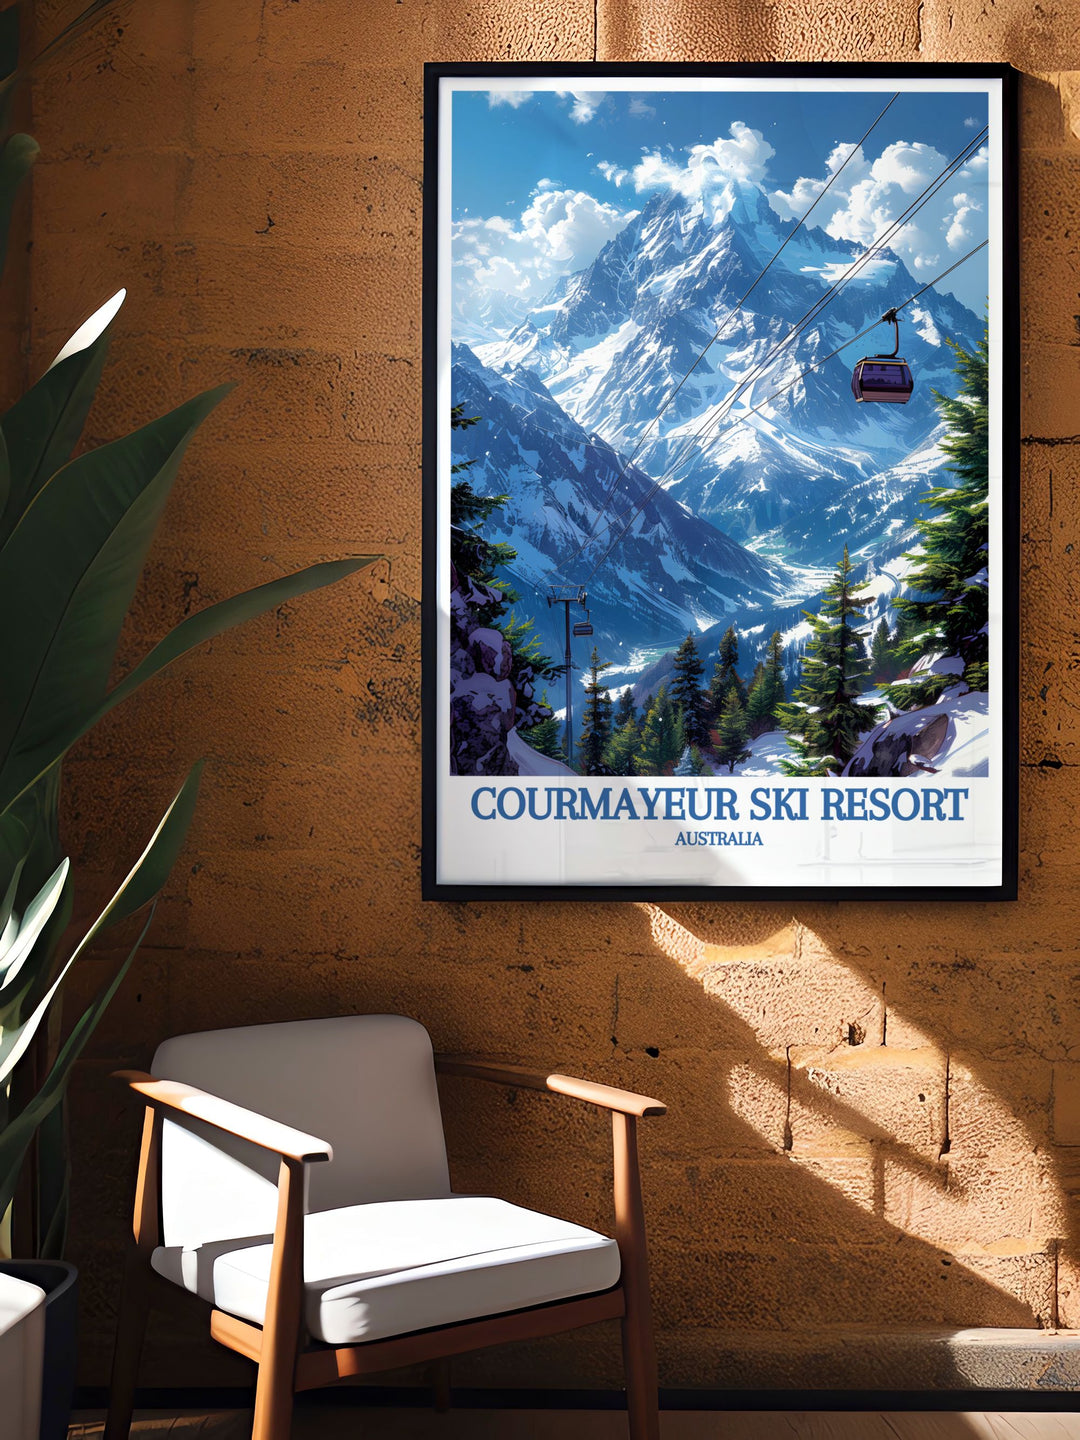 The combination of adventure in Courmayeur and the scenic beauty of Mont Blanc is beautifully captured in this vintage ski poster, making it a stunning addition to any wall art collection celebrating Italian skiing.